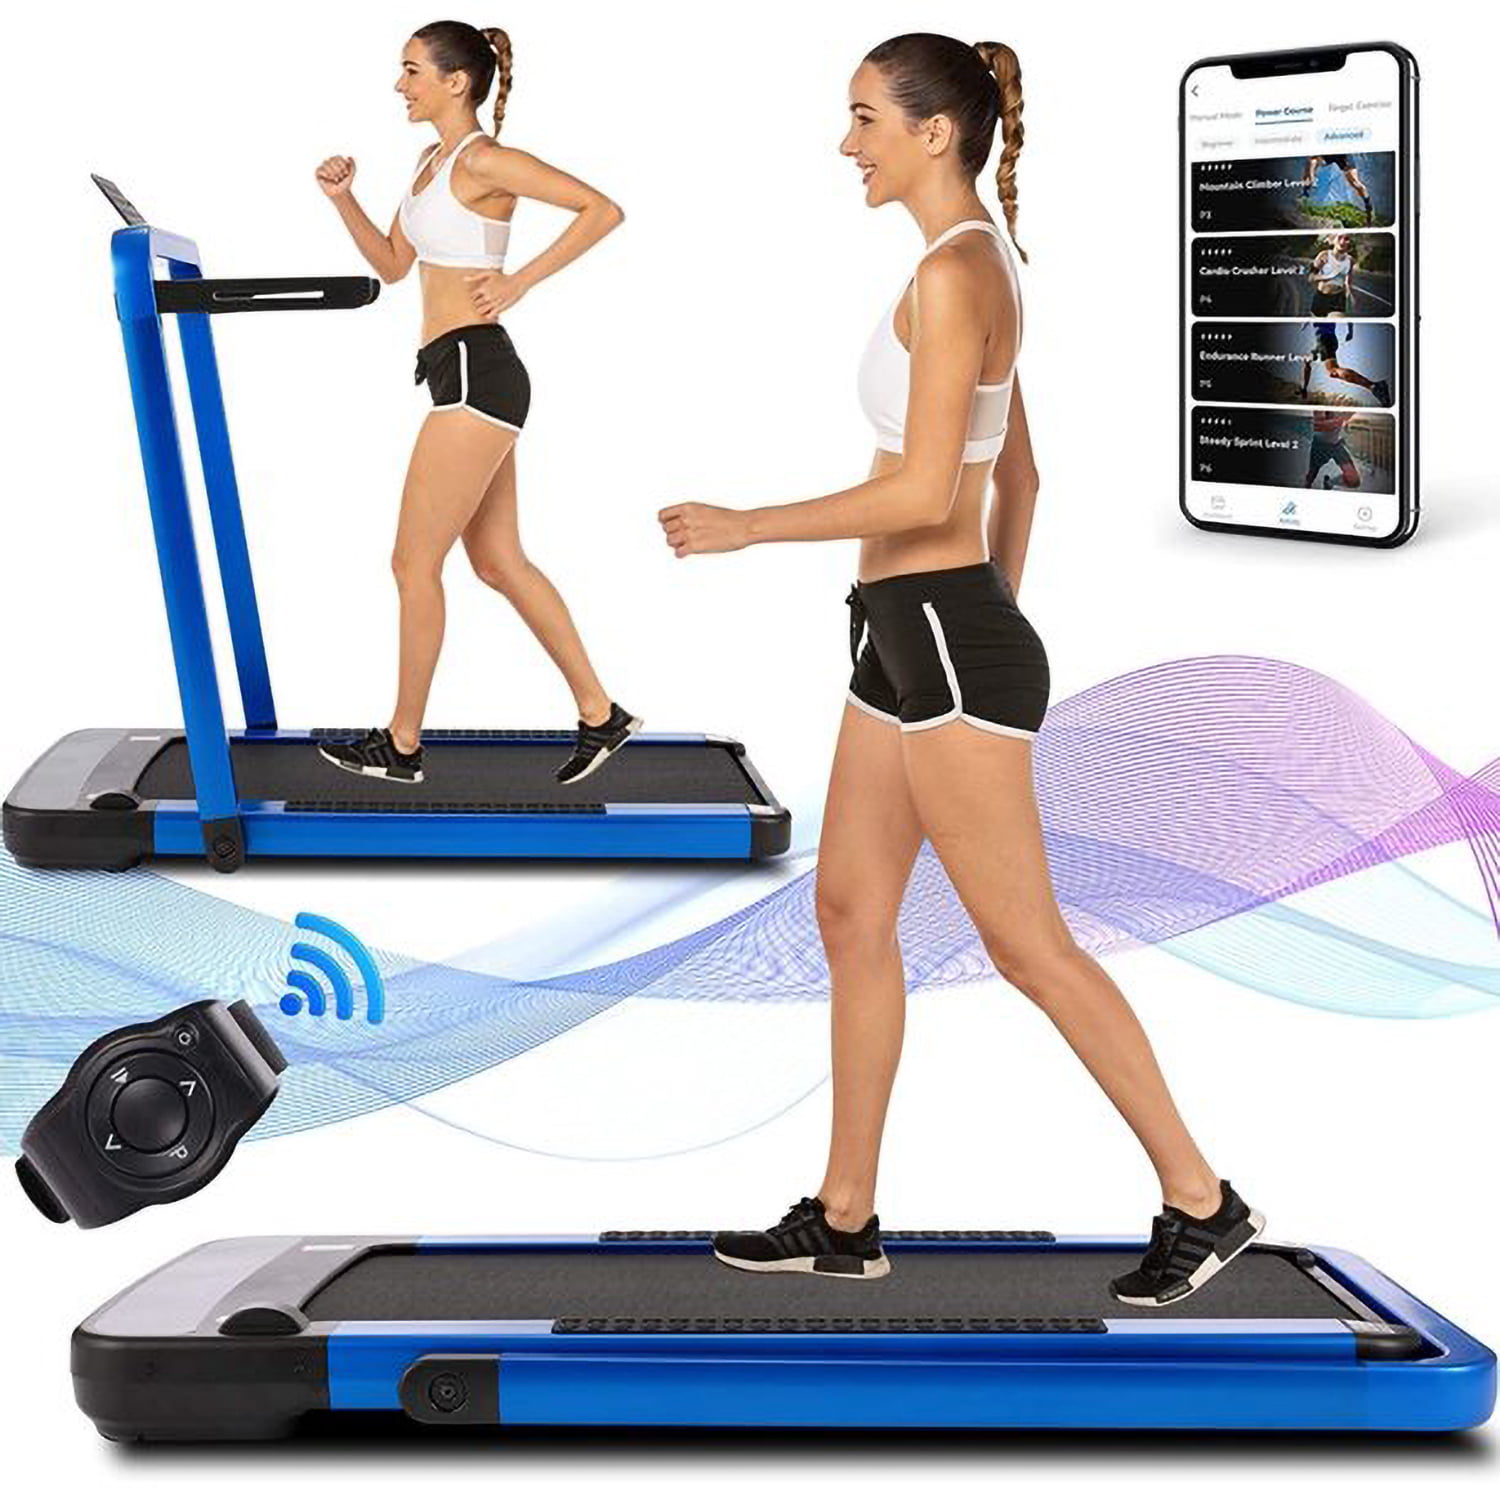 Folding Treadmills for Home,2.25HP APP Control Under Desk Treadmill Workout,2in1 Electric Walking Jogging Running Machine Installation-Free 